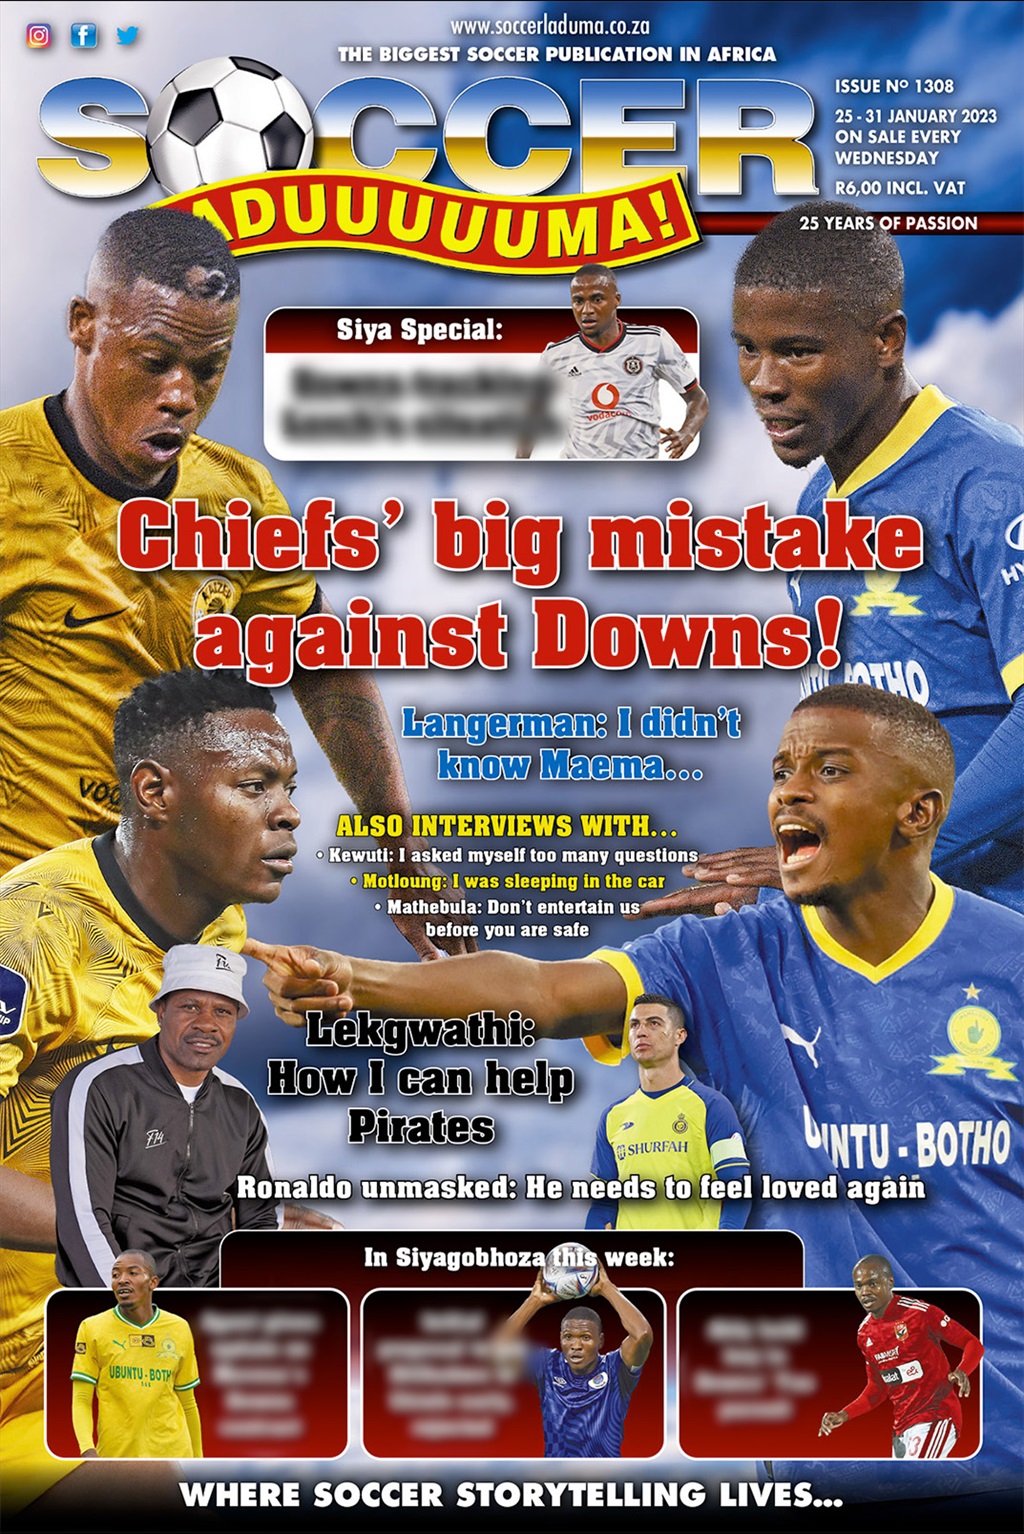 In this week's edition of Soccer Laduma